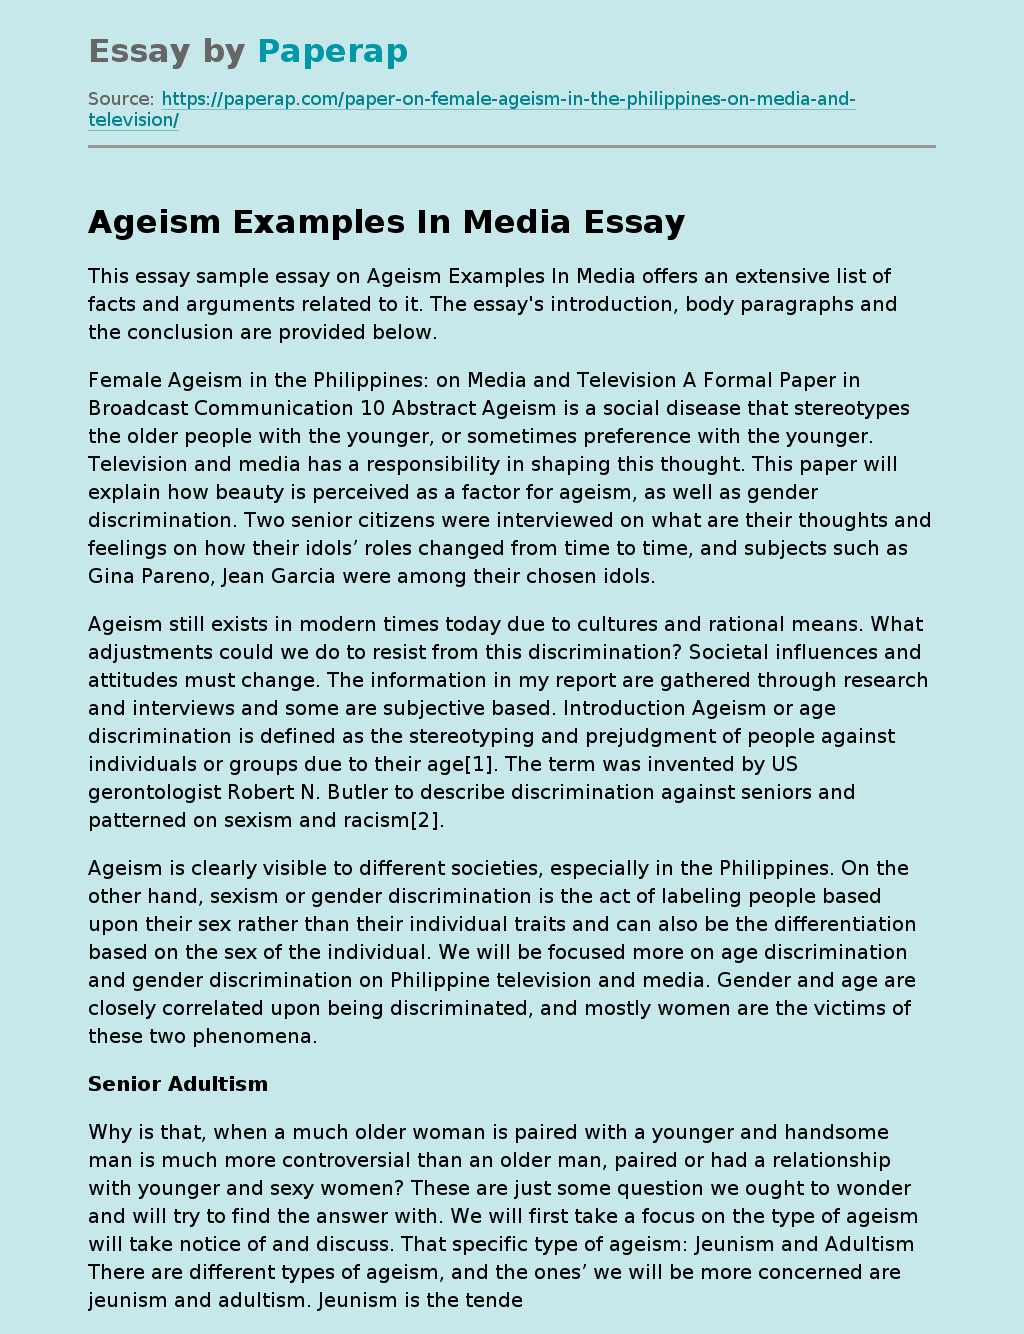 Ageism Examples In Media